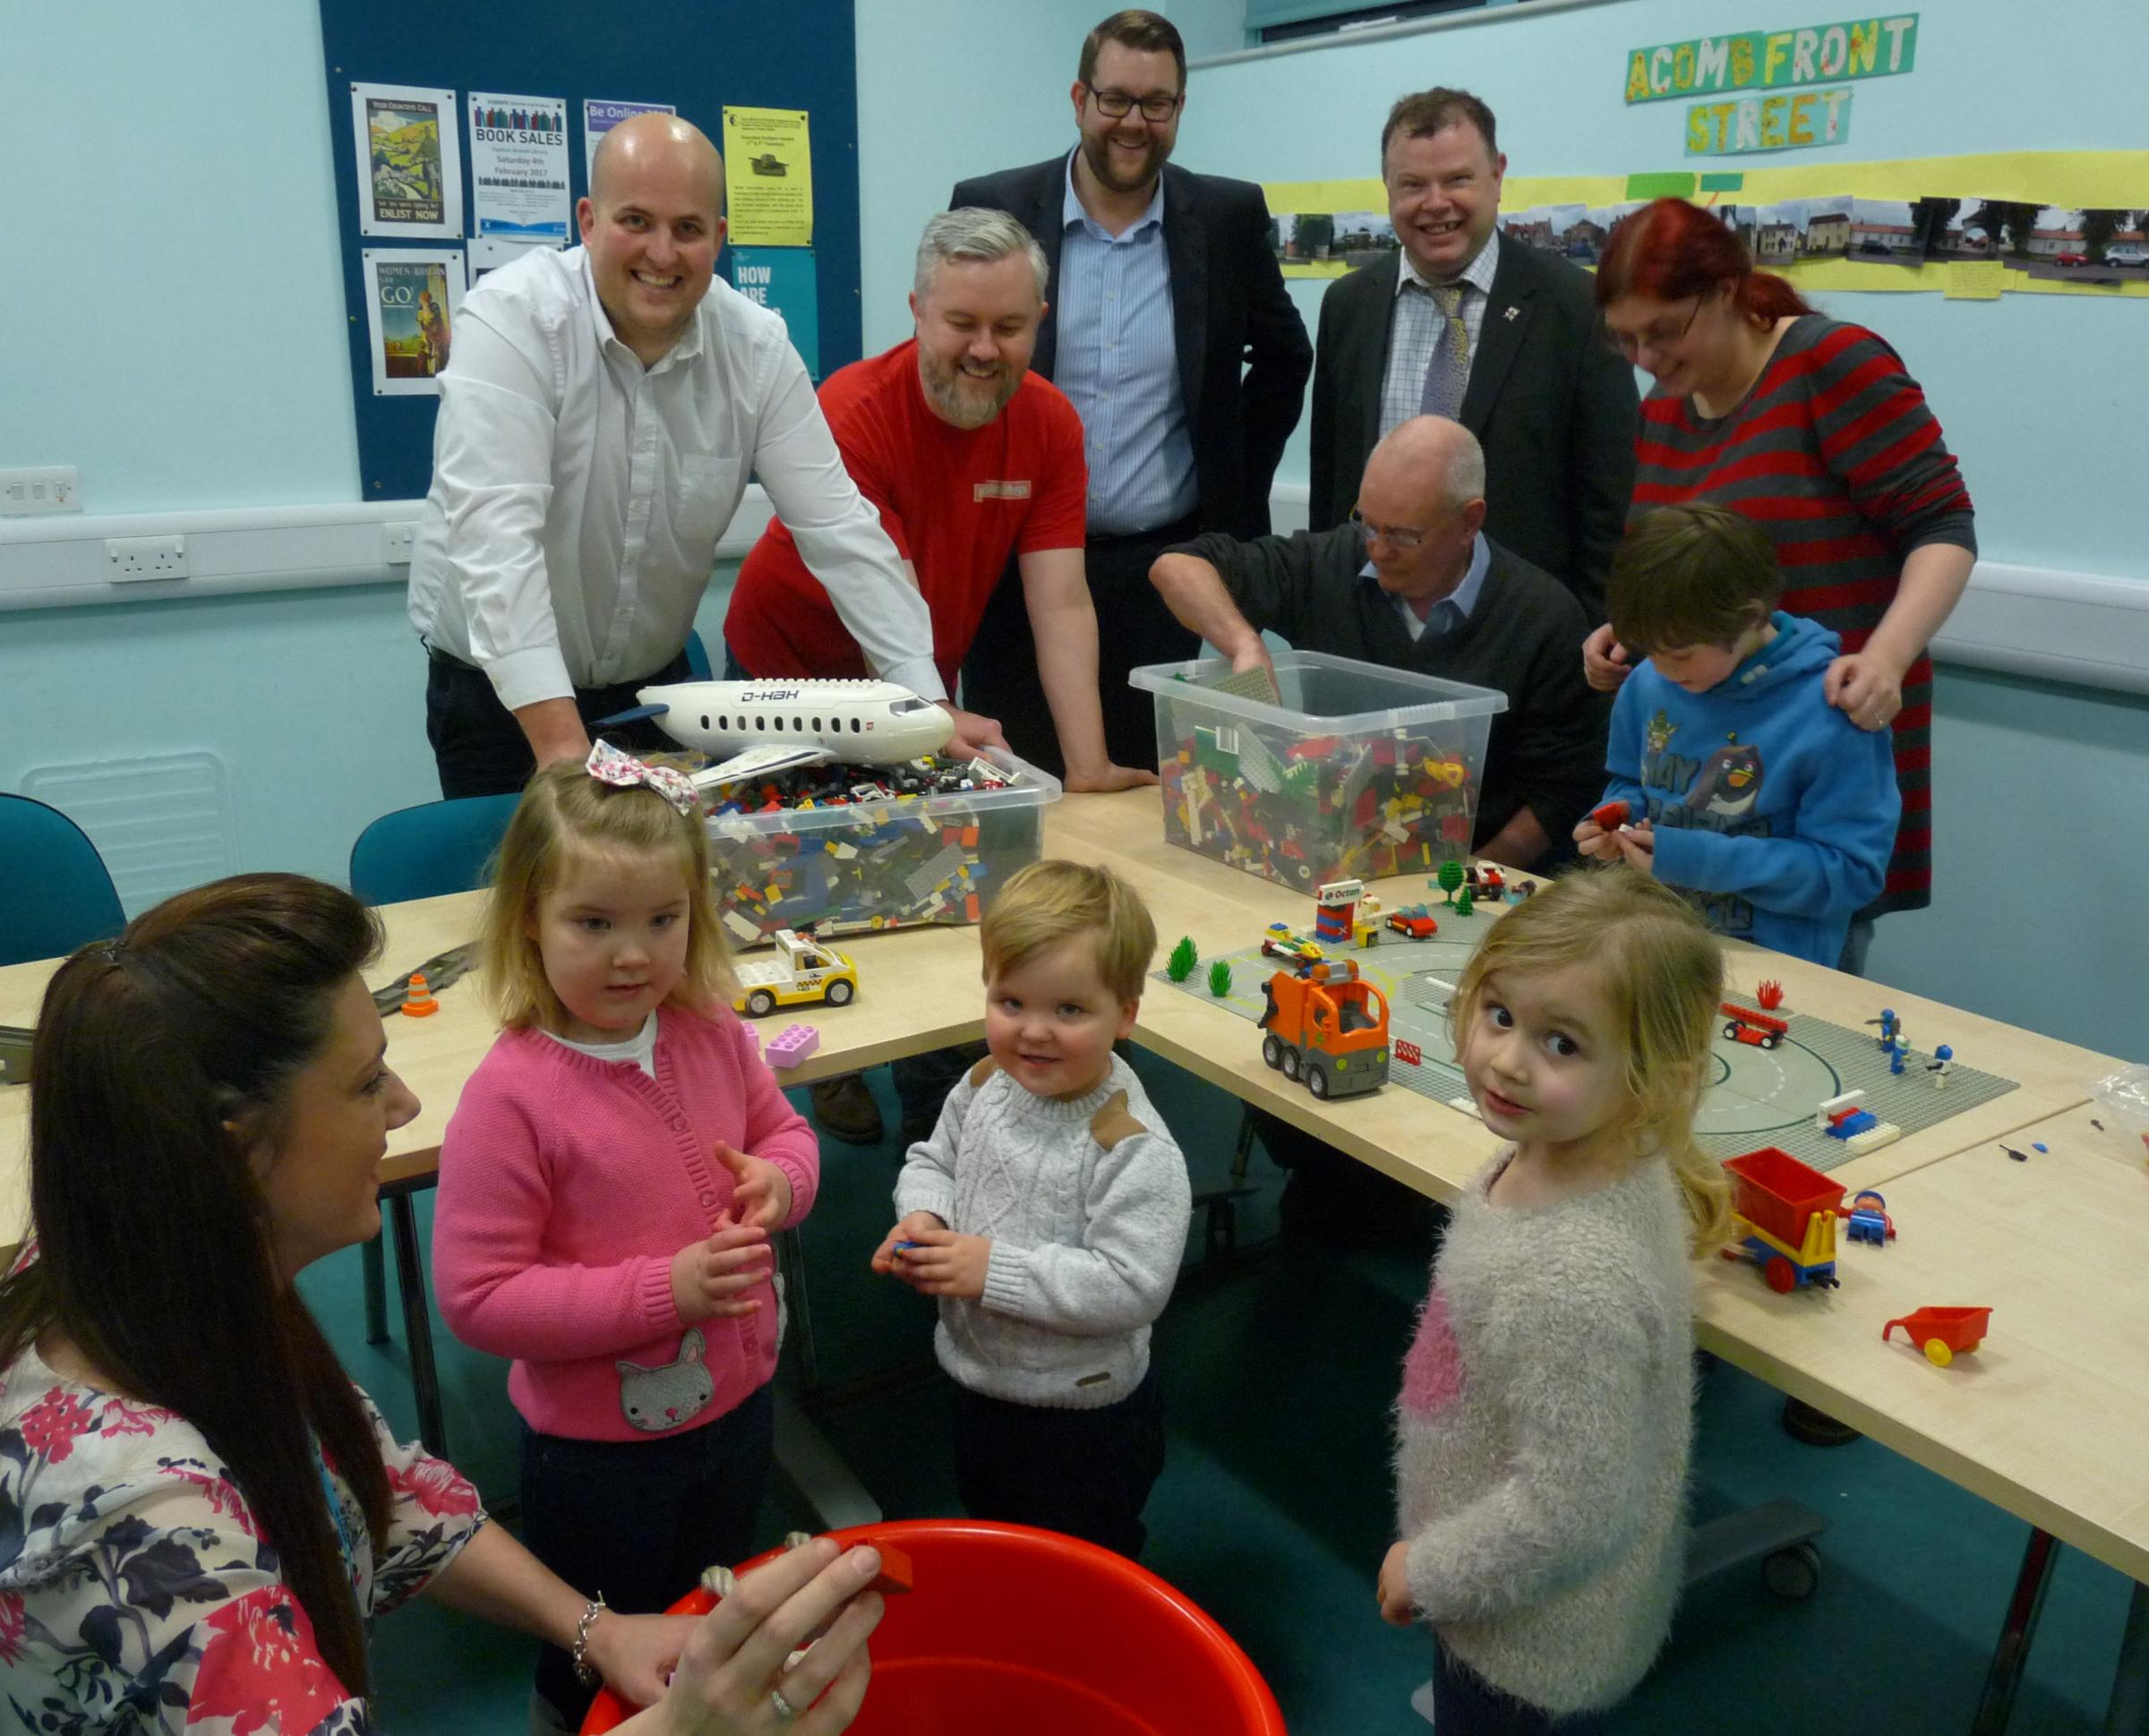 Lego event for York dads